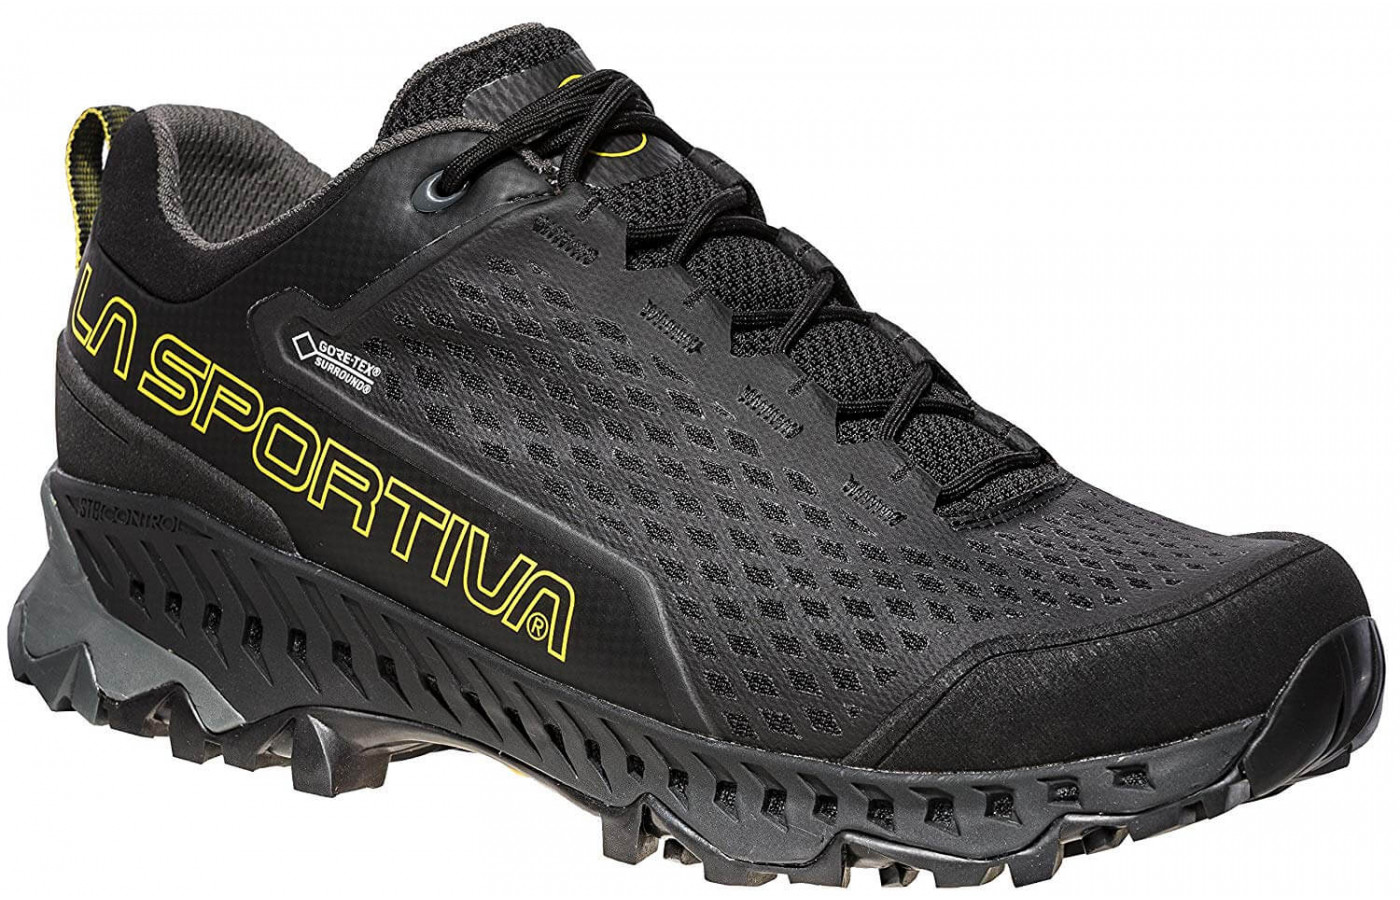 The Spire GTX is available in black or blue.